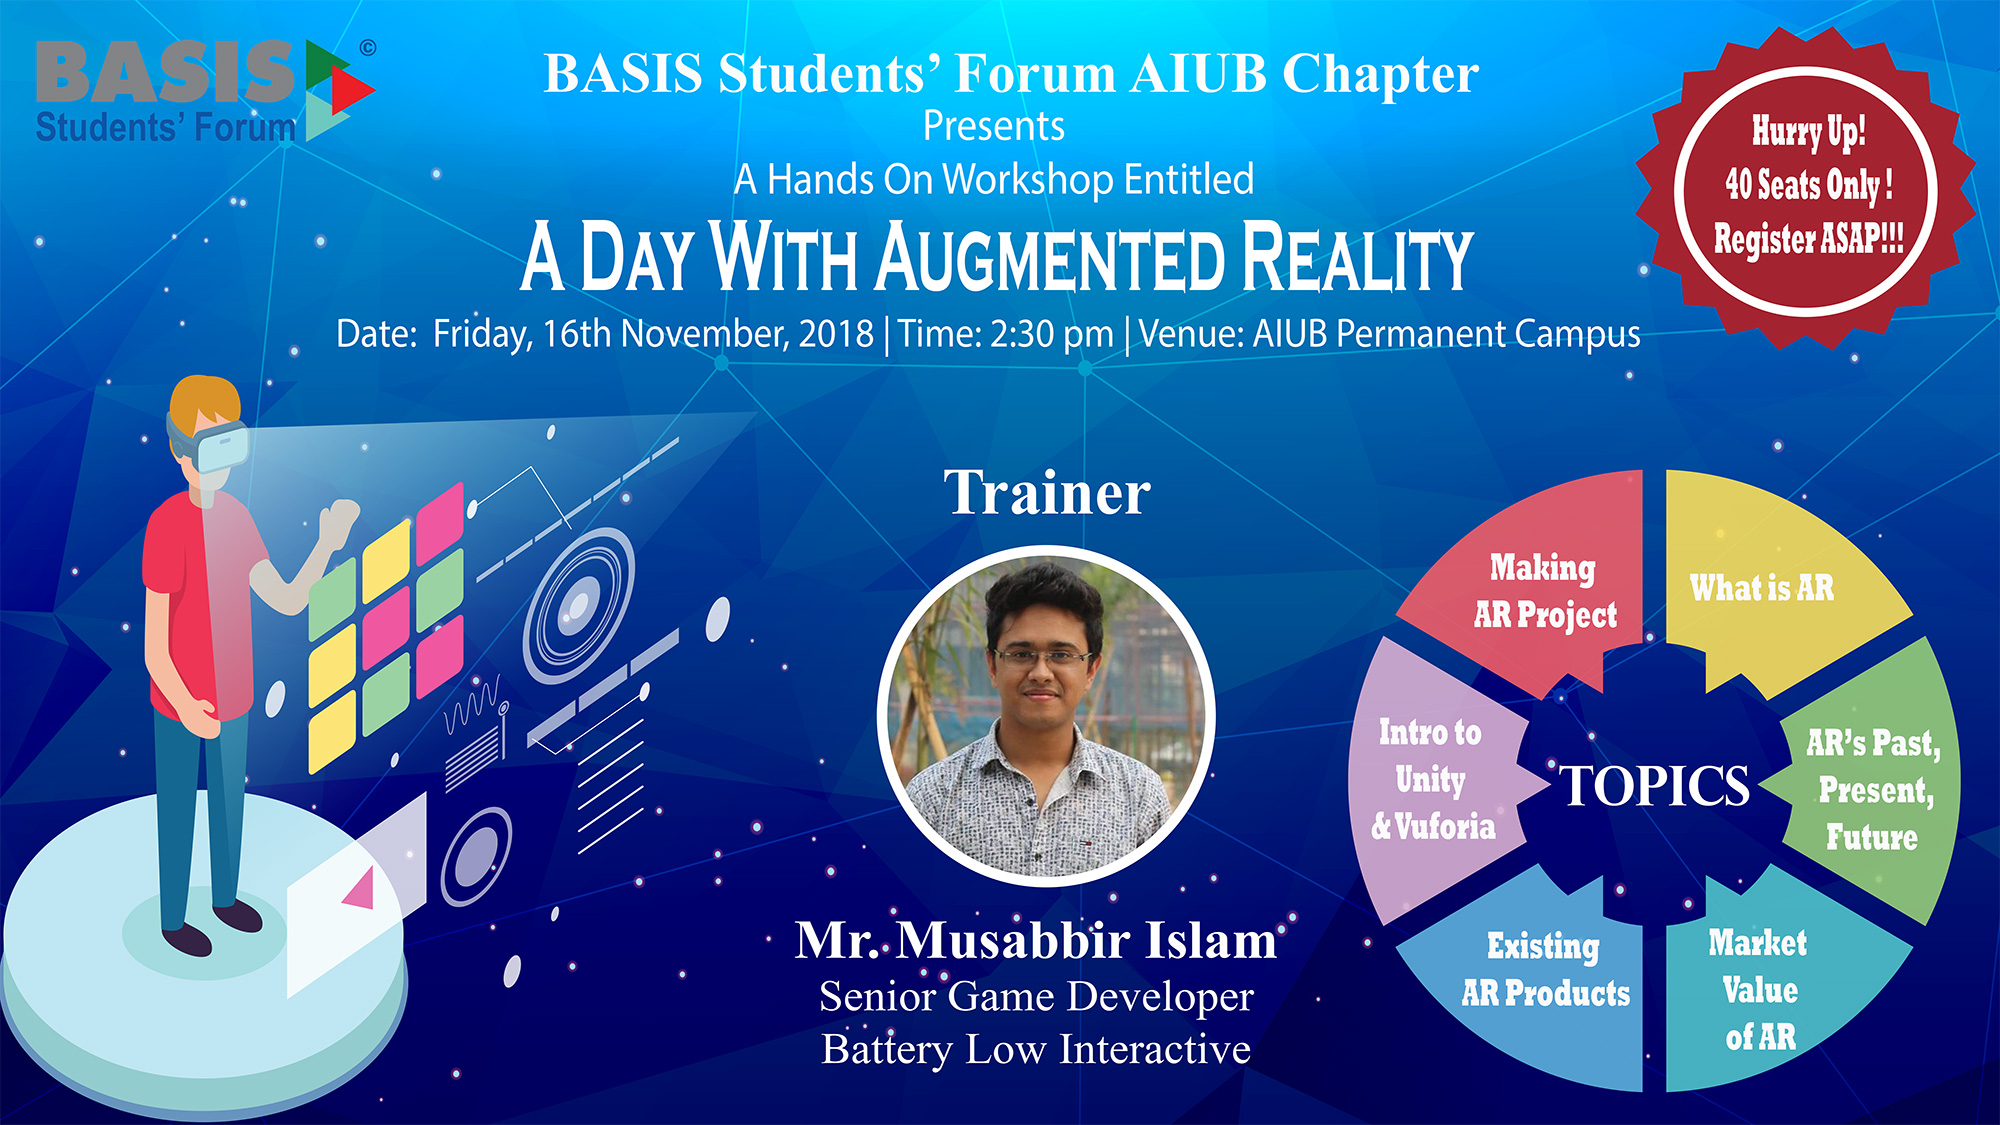 AIUB: A Day With Augmented Reality